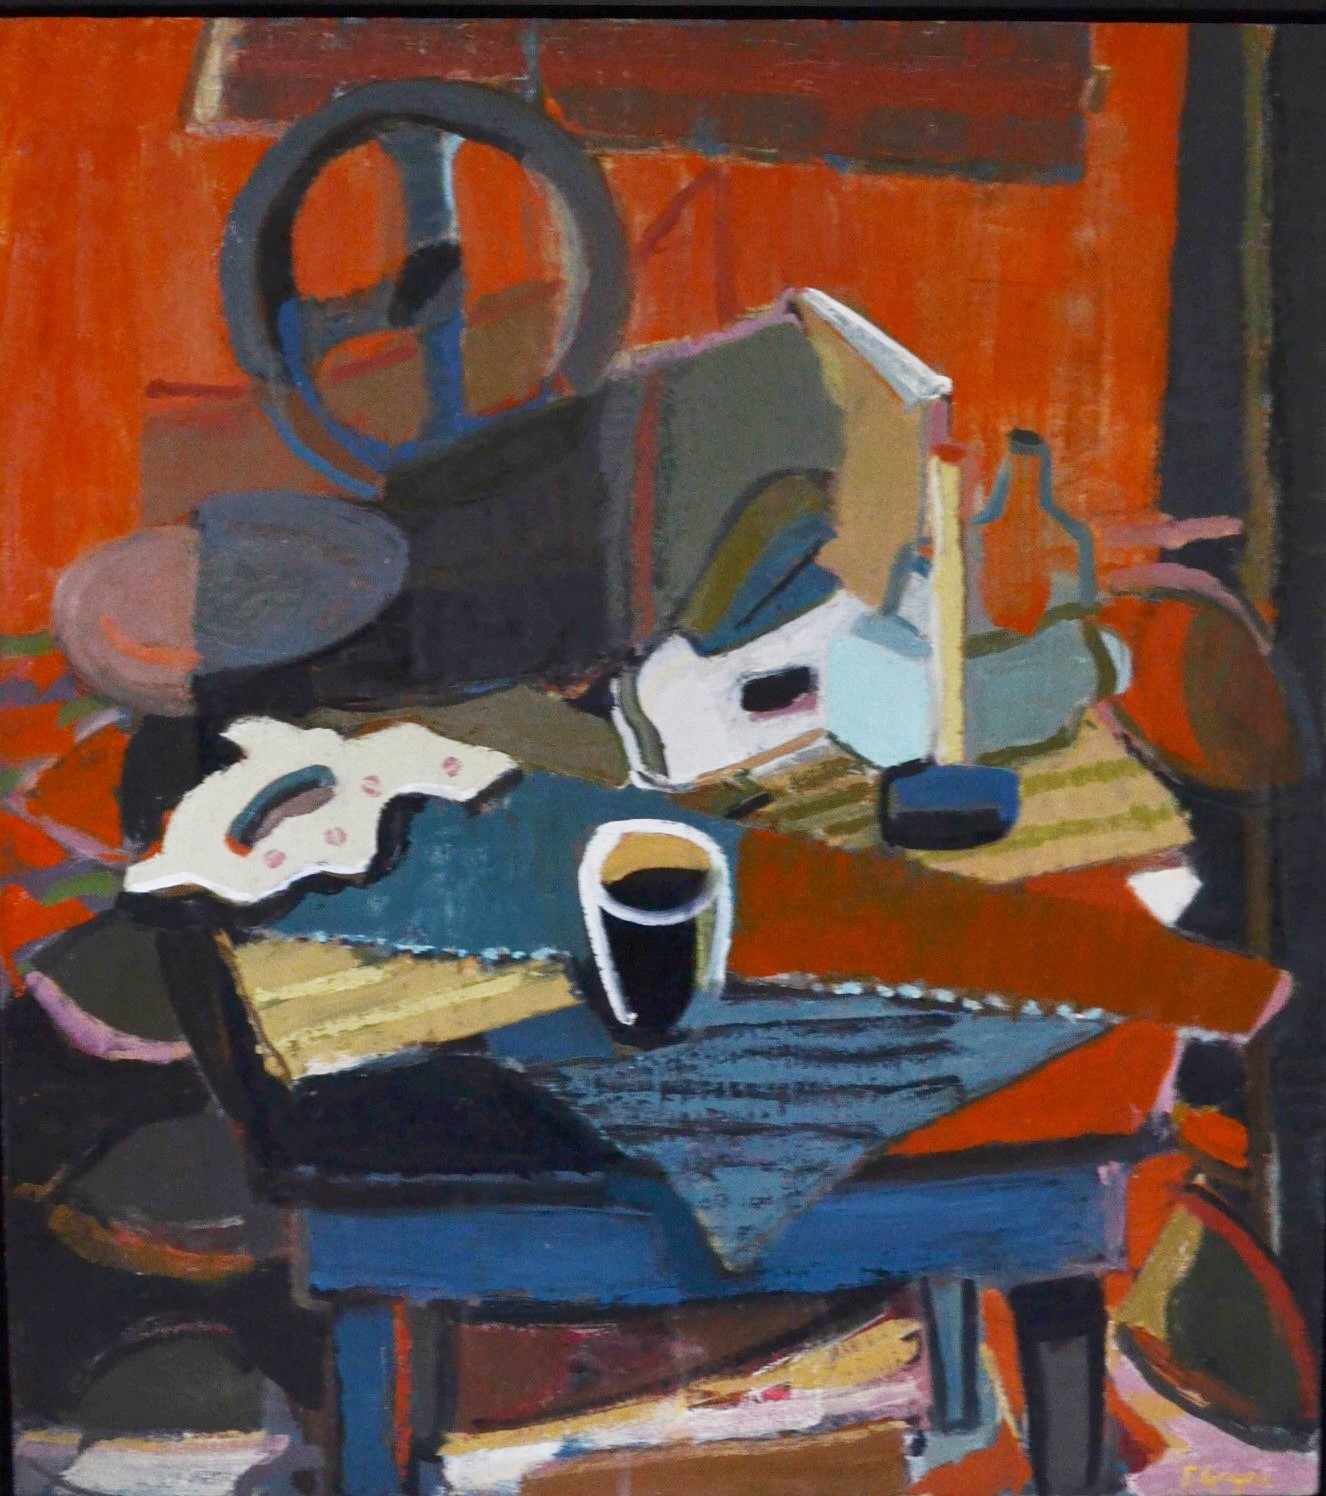 "Still Life with Tools", 40" X 36", oil on linen, 2015